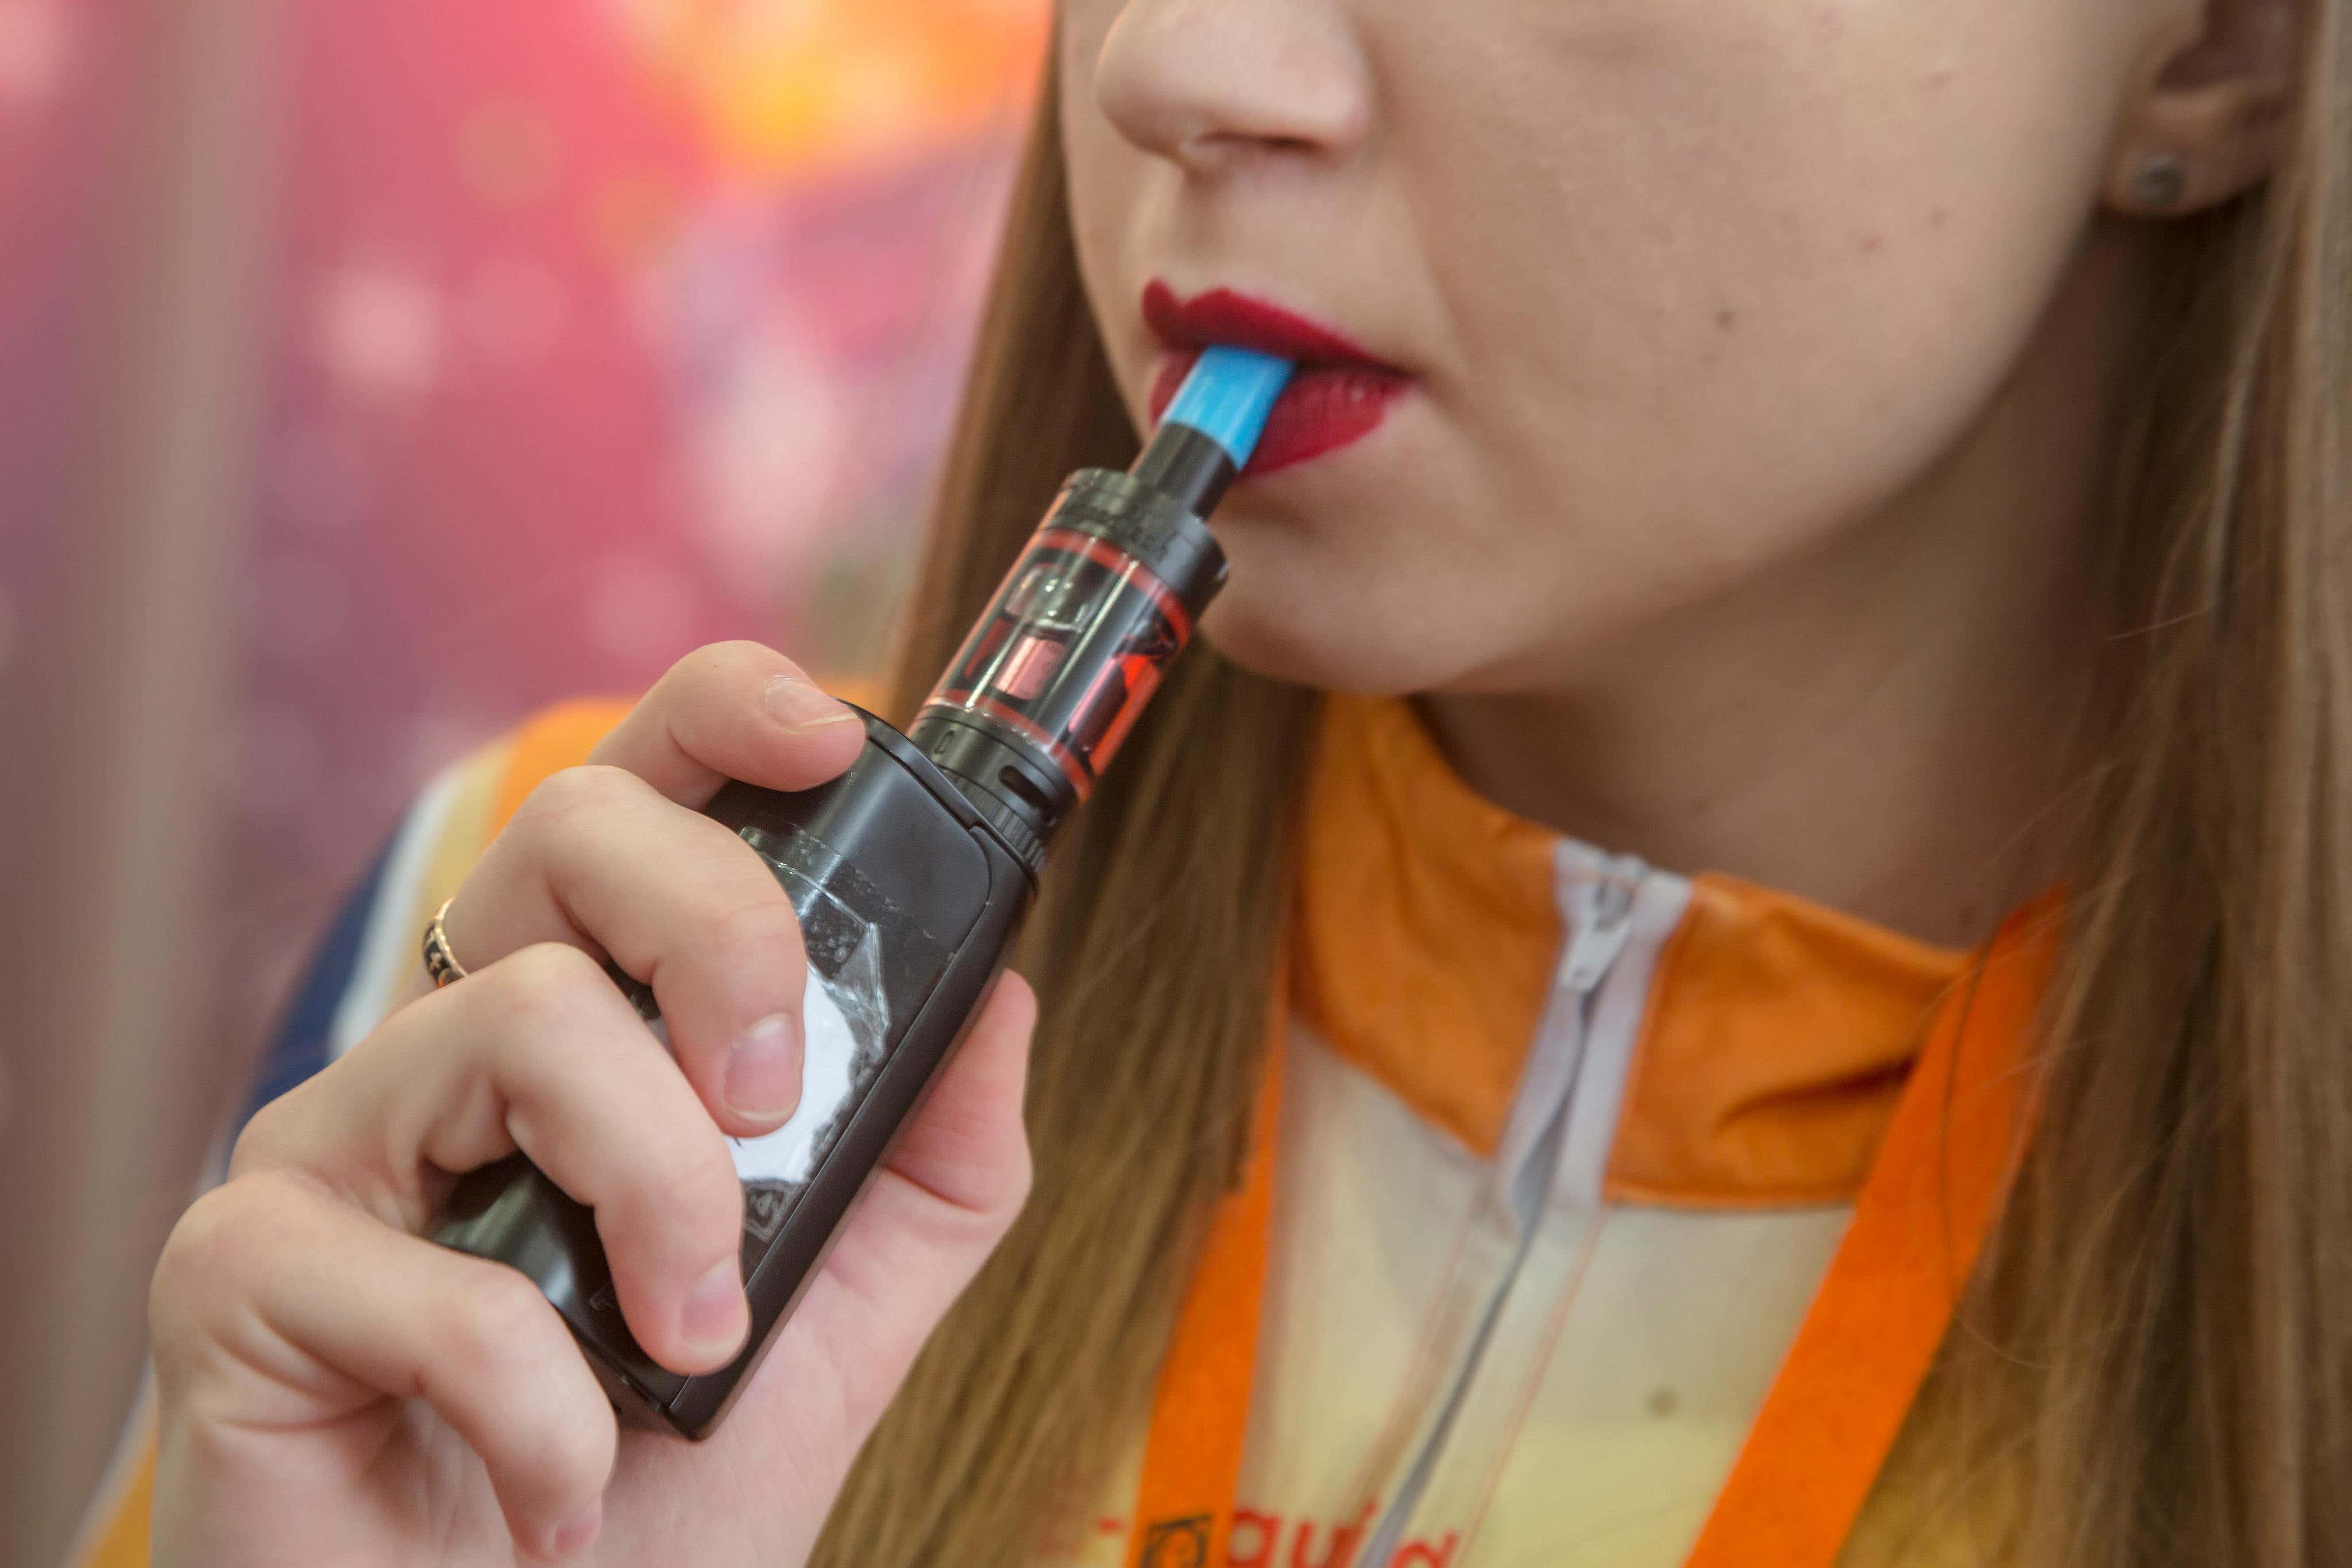 Experts warn vaping is fast becoming an ‘epidemic’ among children